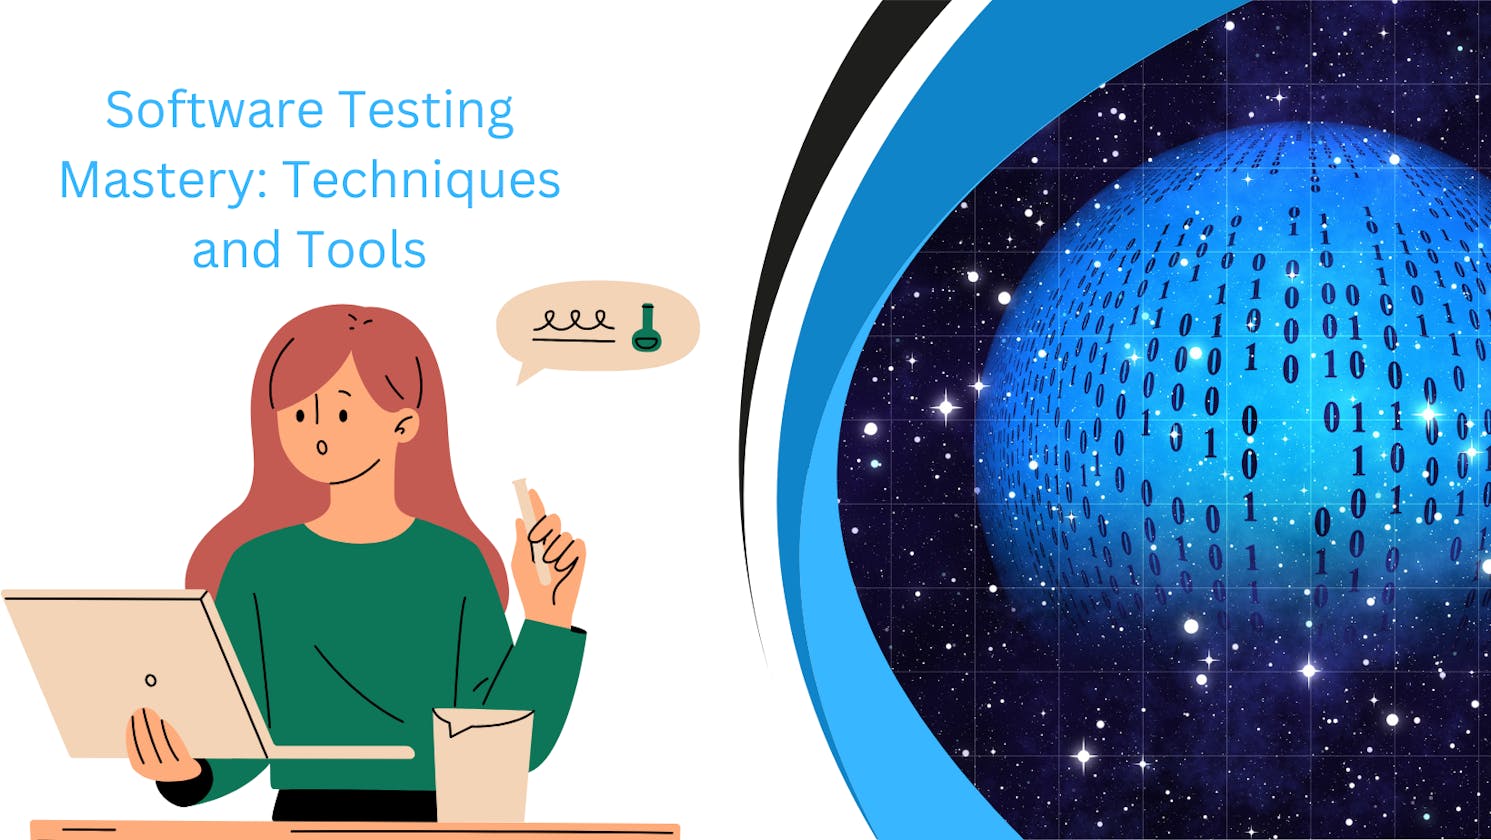 Software Testing Mastery: Techniques and Tools